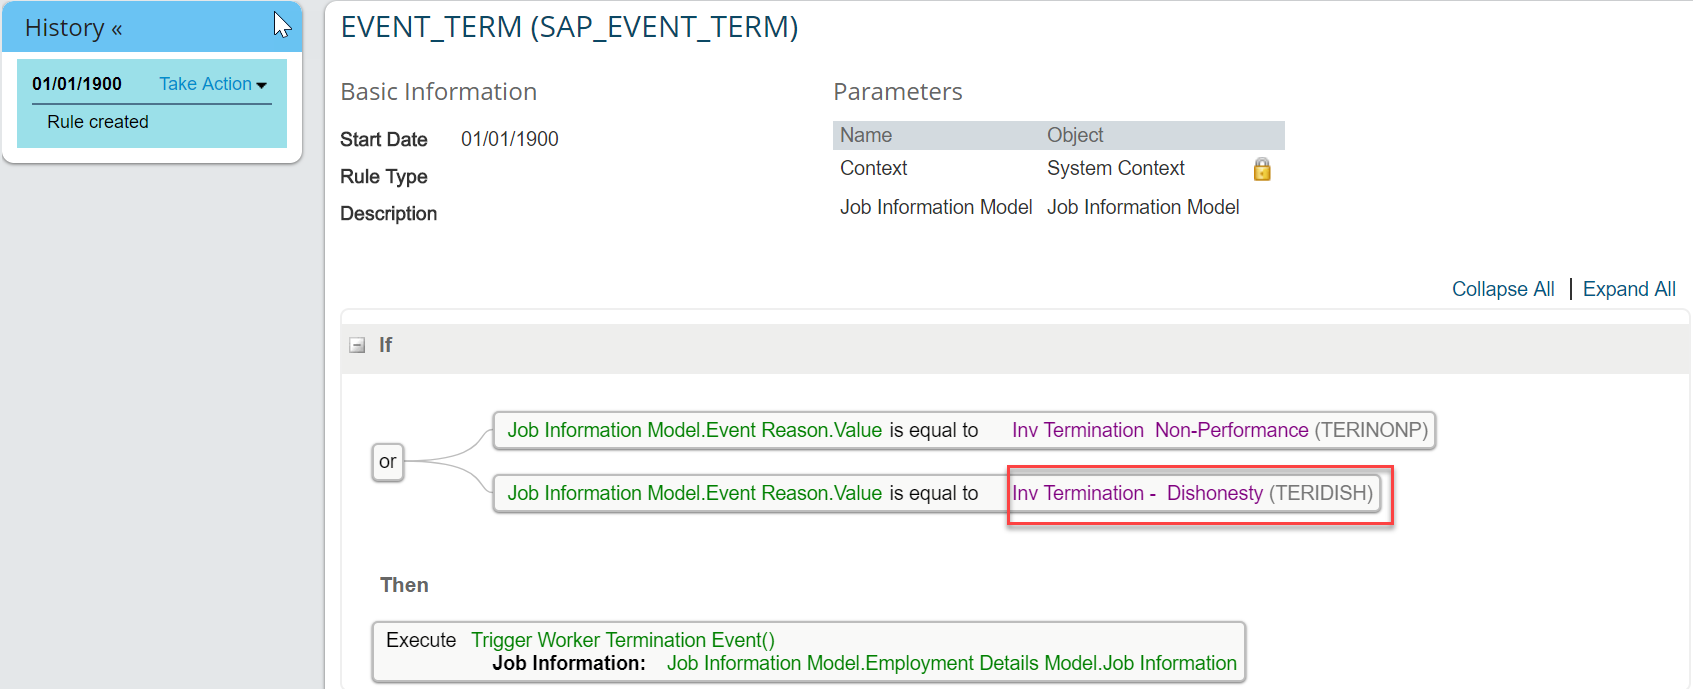 SAP_EVENT_TERM New.png